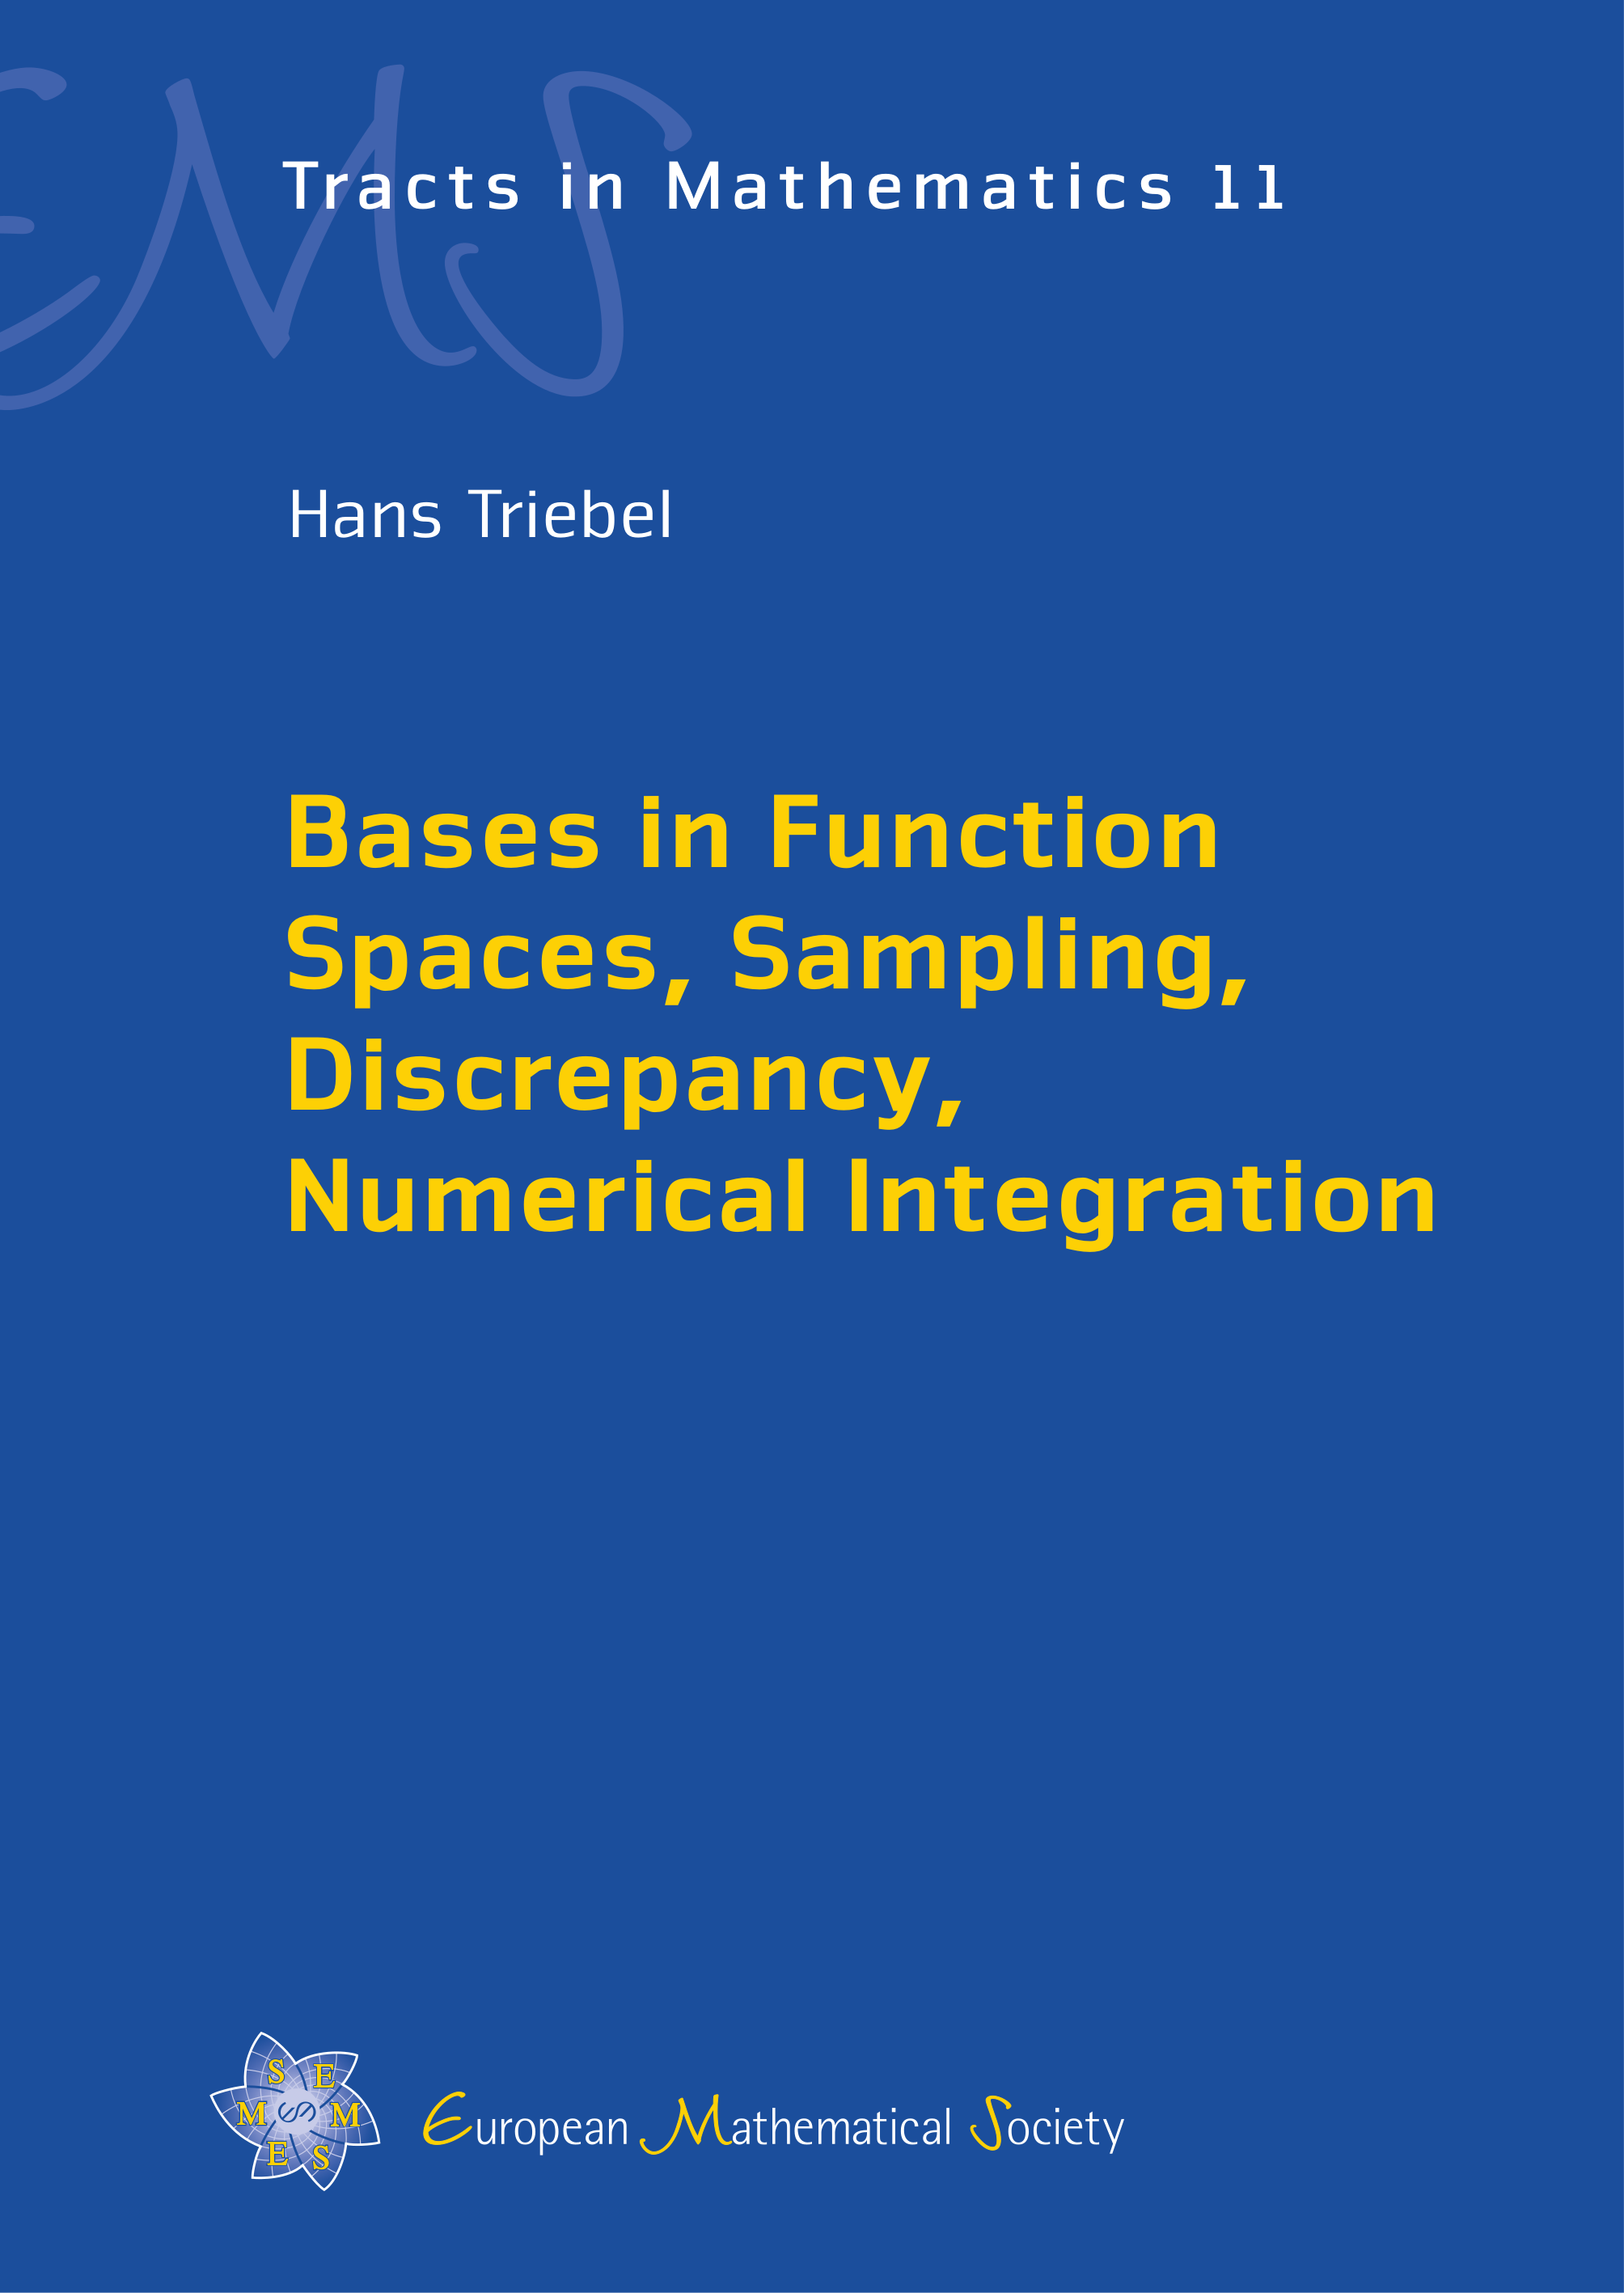 Function spaces cover